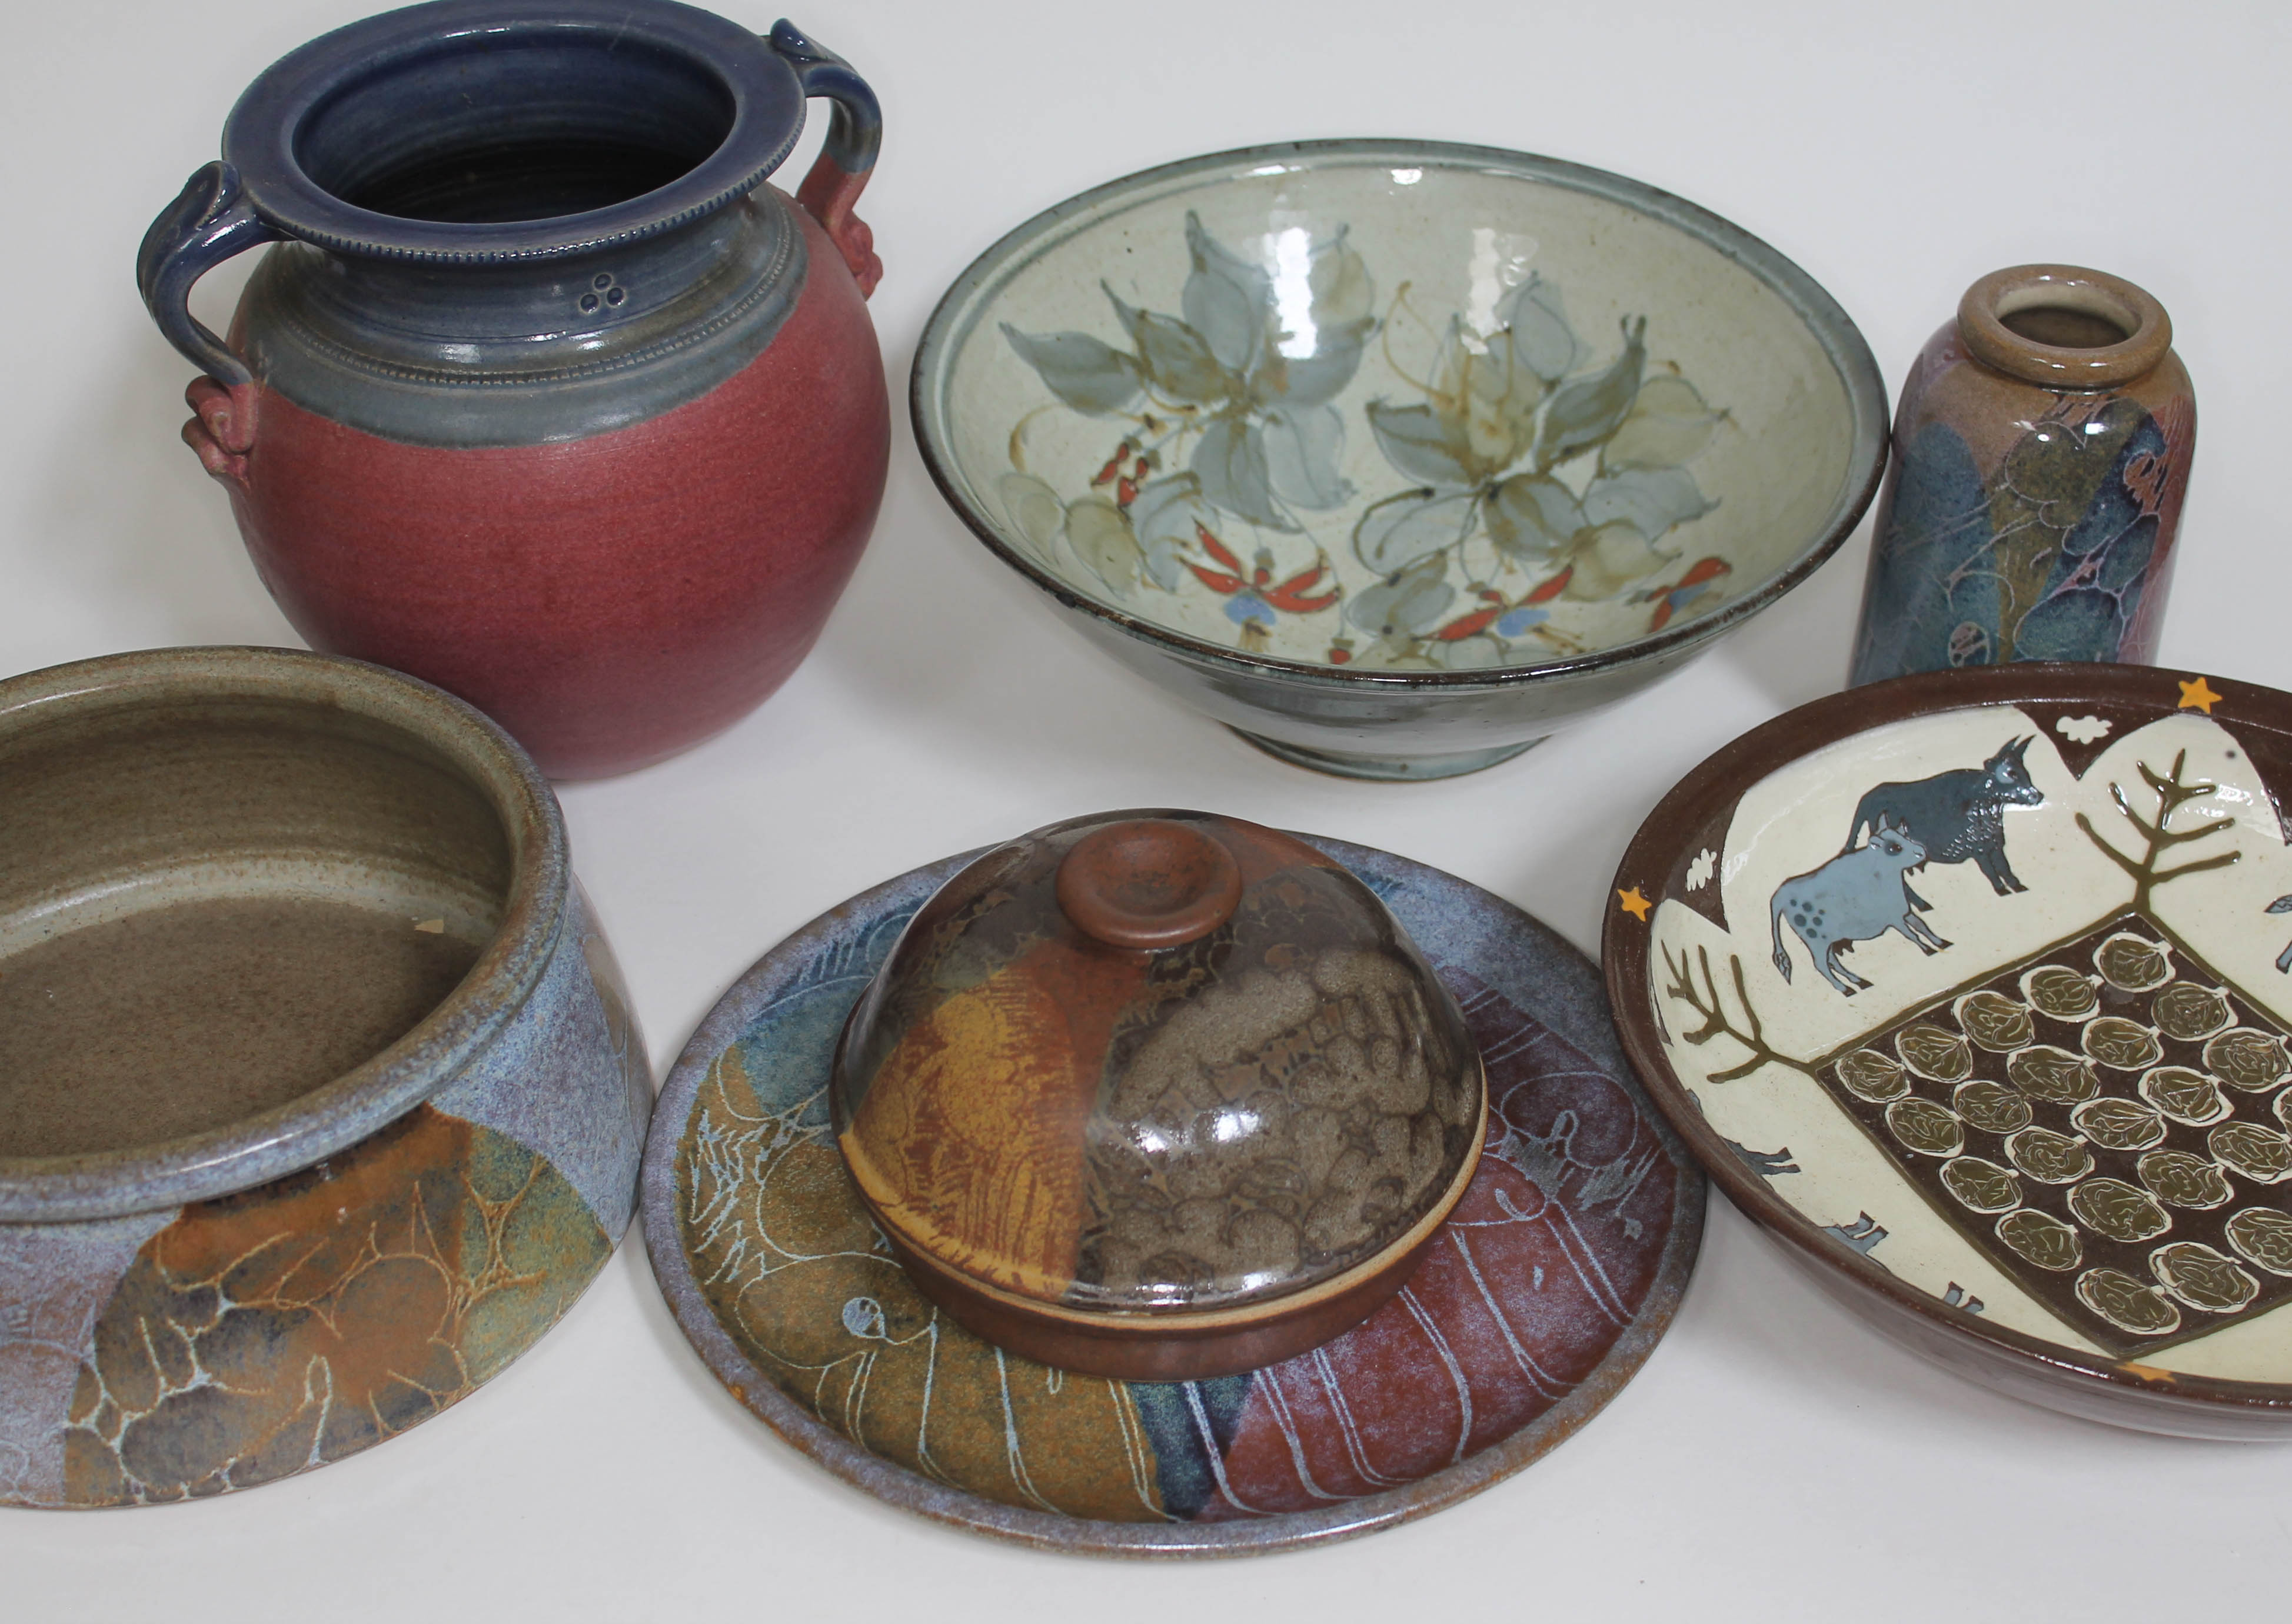 Six items of studio pottery comprising three items by Crich Pottery, a twin handled pot by St